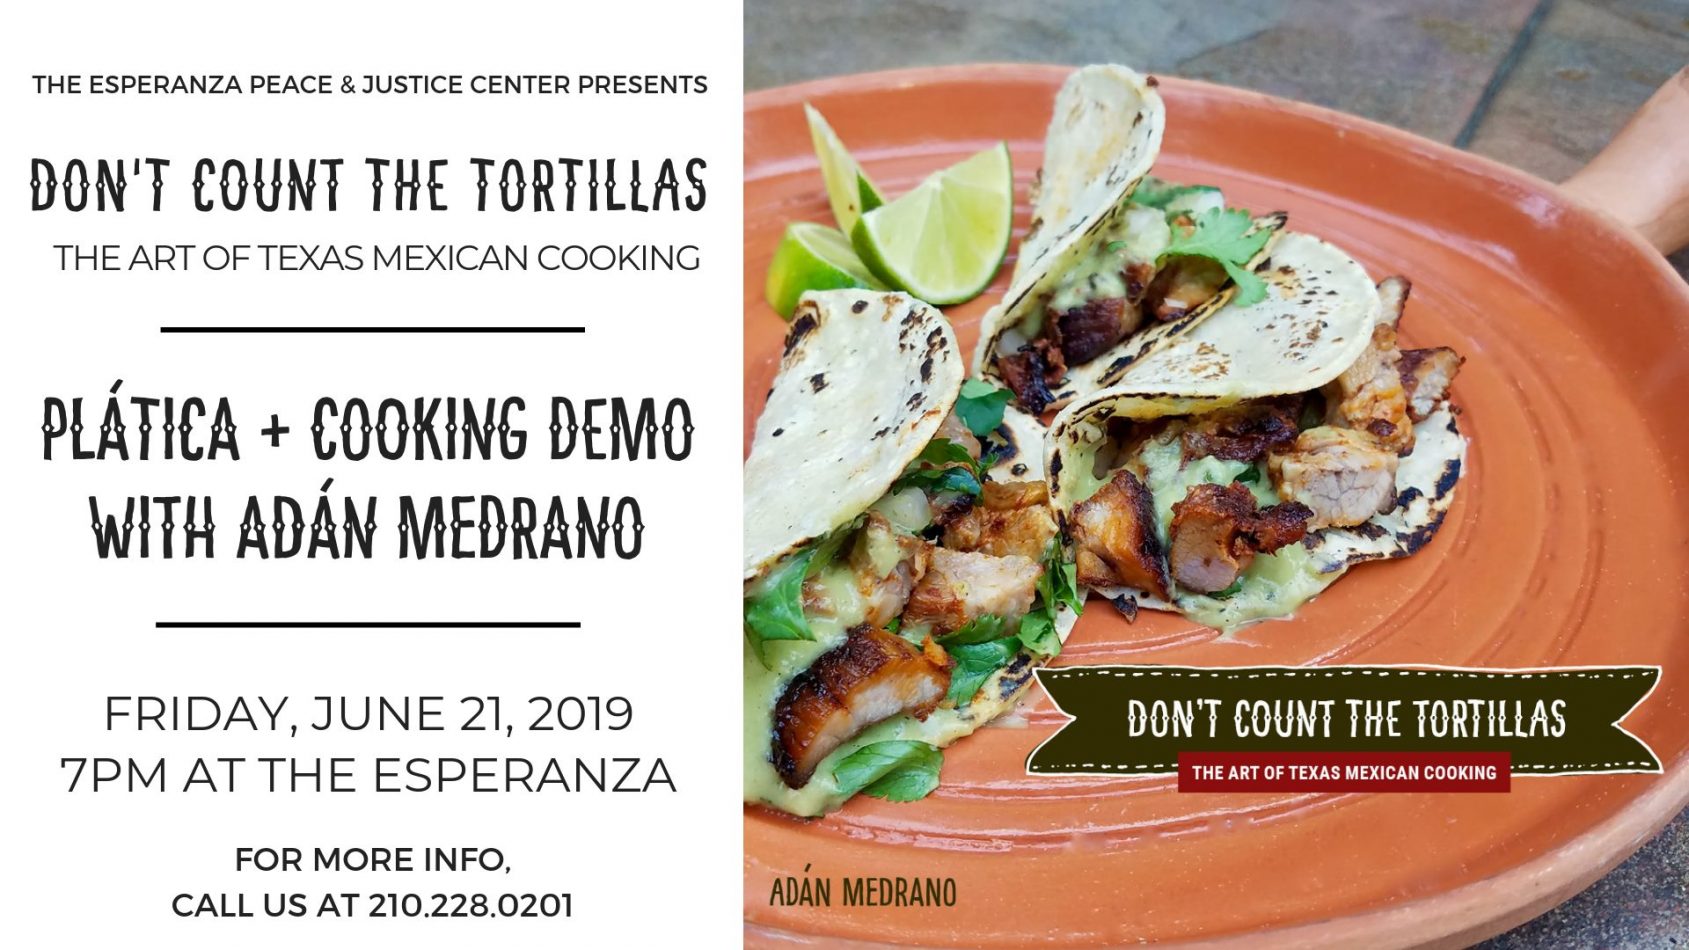 Gallery 1 - Don’t Count The Tortillas: The Art of Texas Mexican Cooking with Chef Adán Medrano